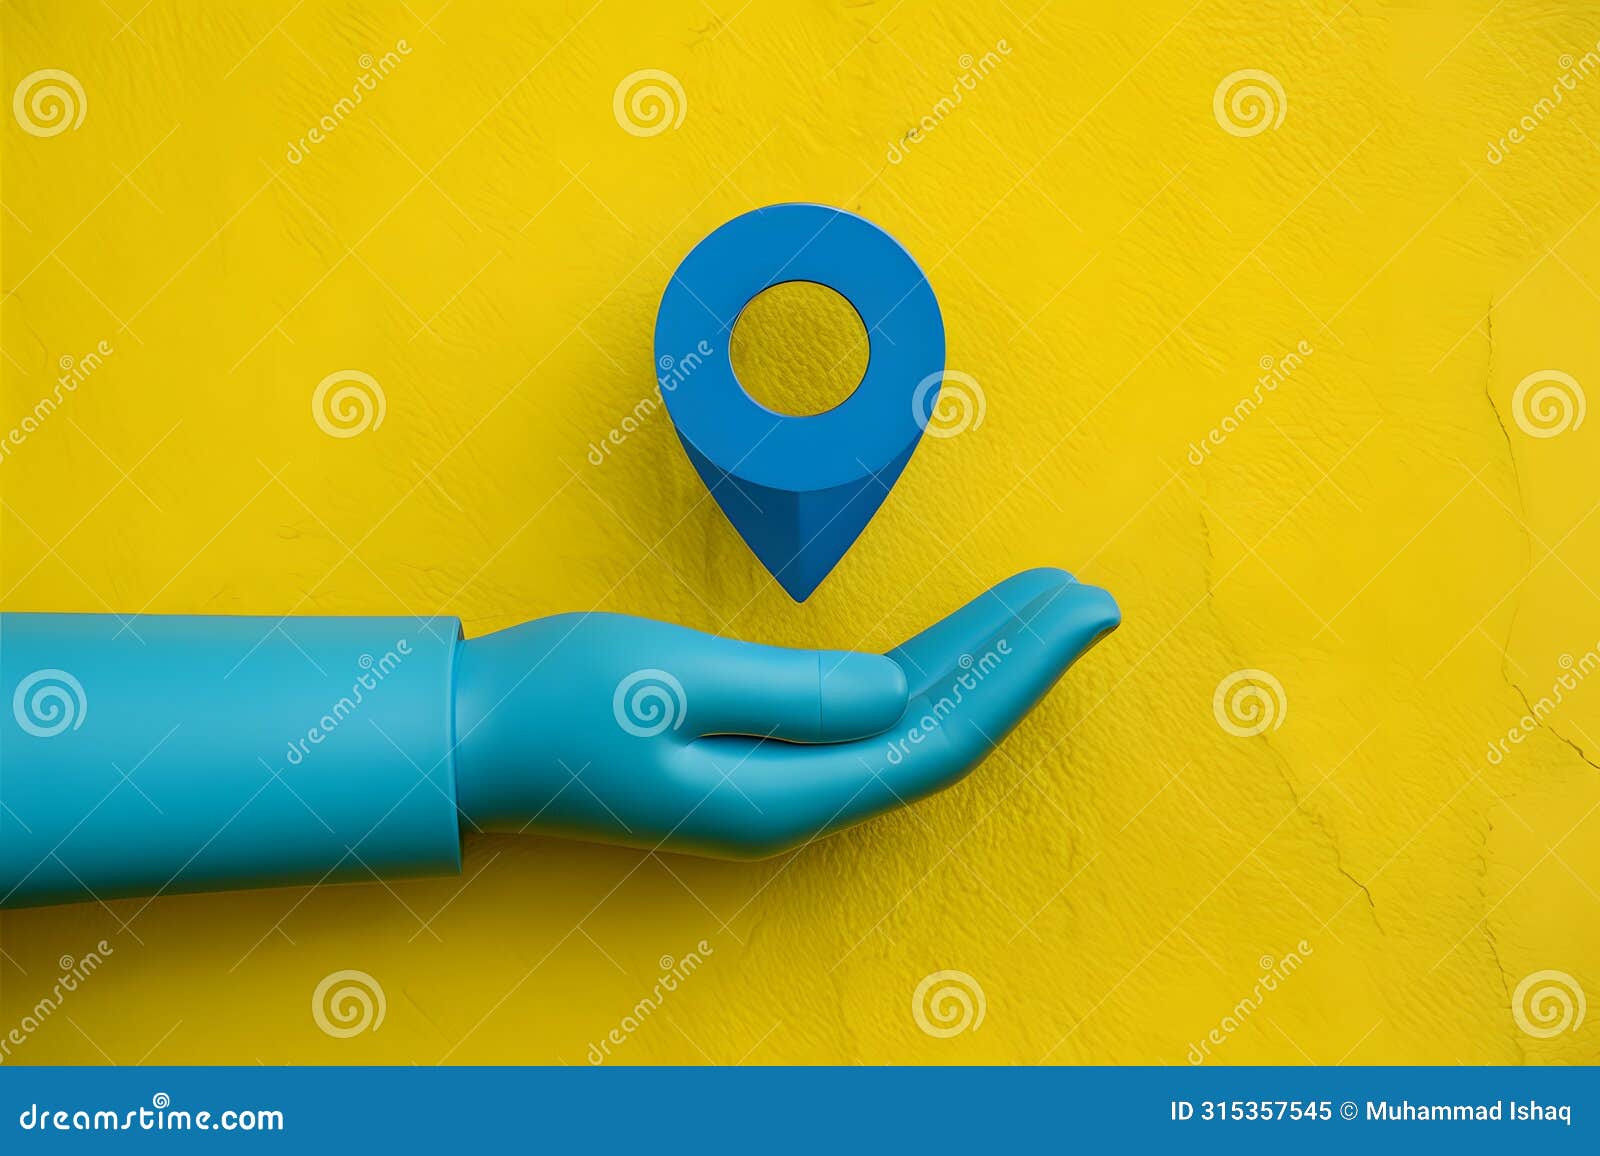 bright yellow background, blue pin, hand holding grocery bag, seamless delivery service concept